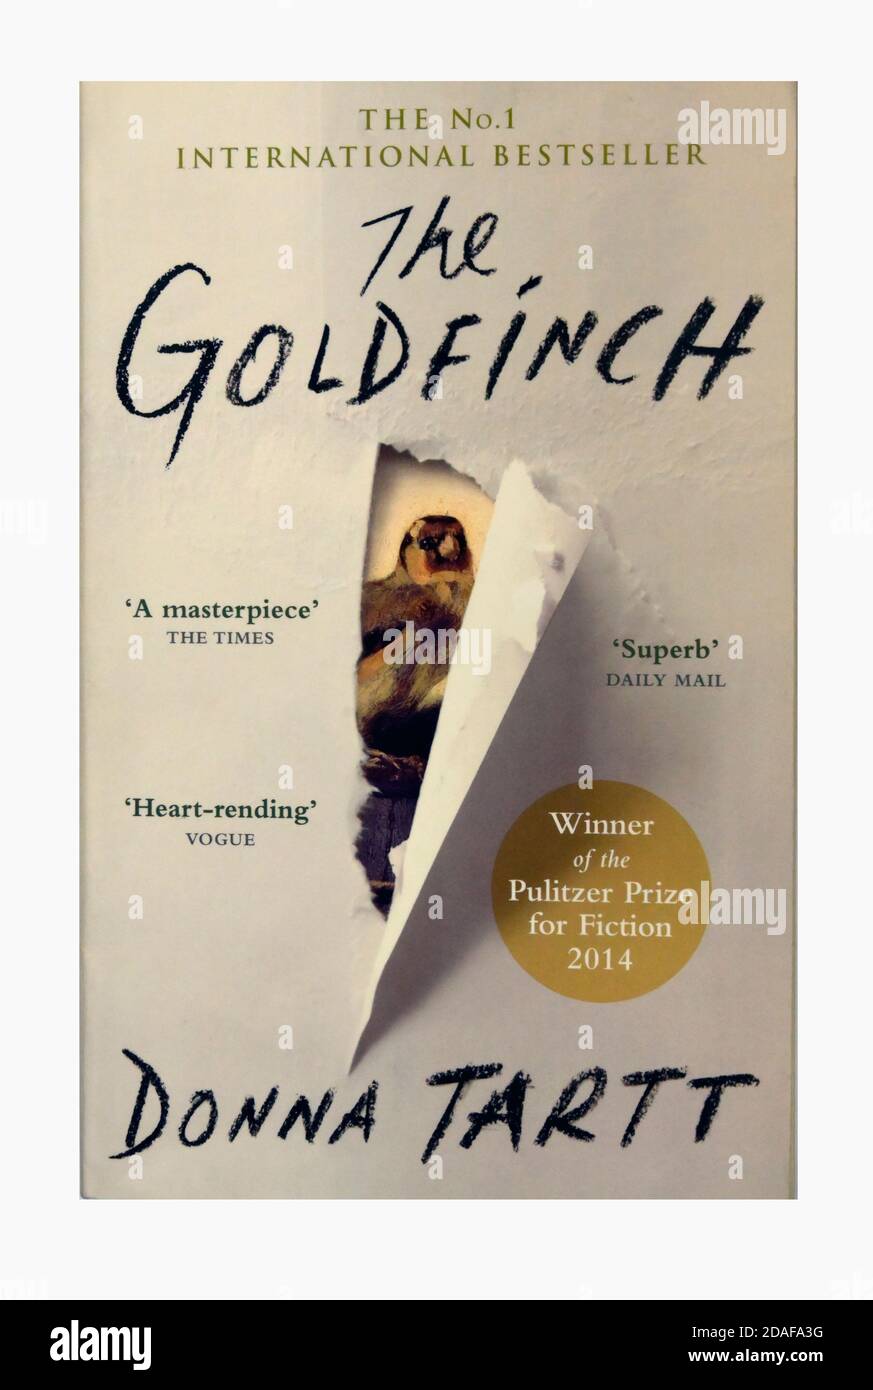 Paperback book cover. 'The Goldfinch' by Donna Tartt. The No.1 International Bestseller. Stock Photo